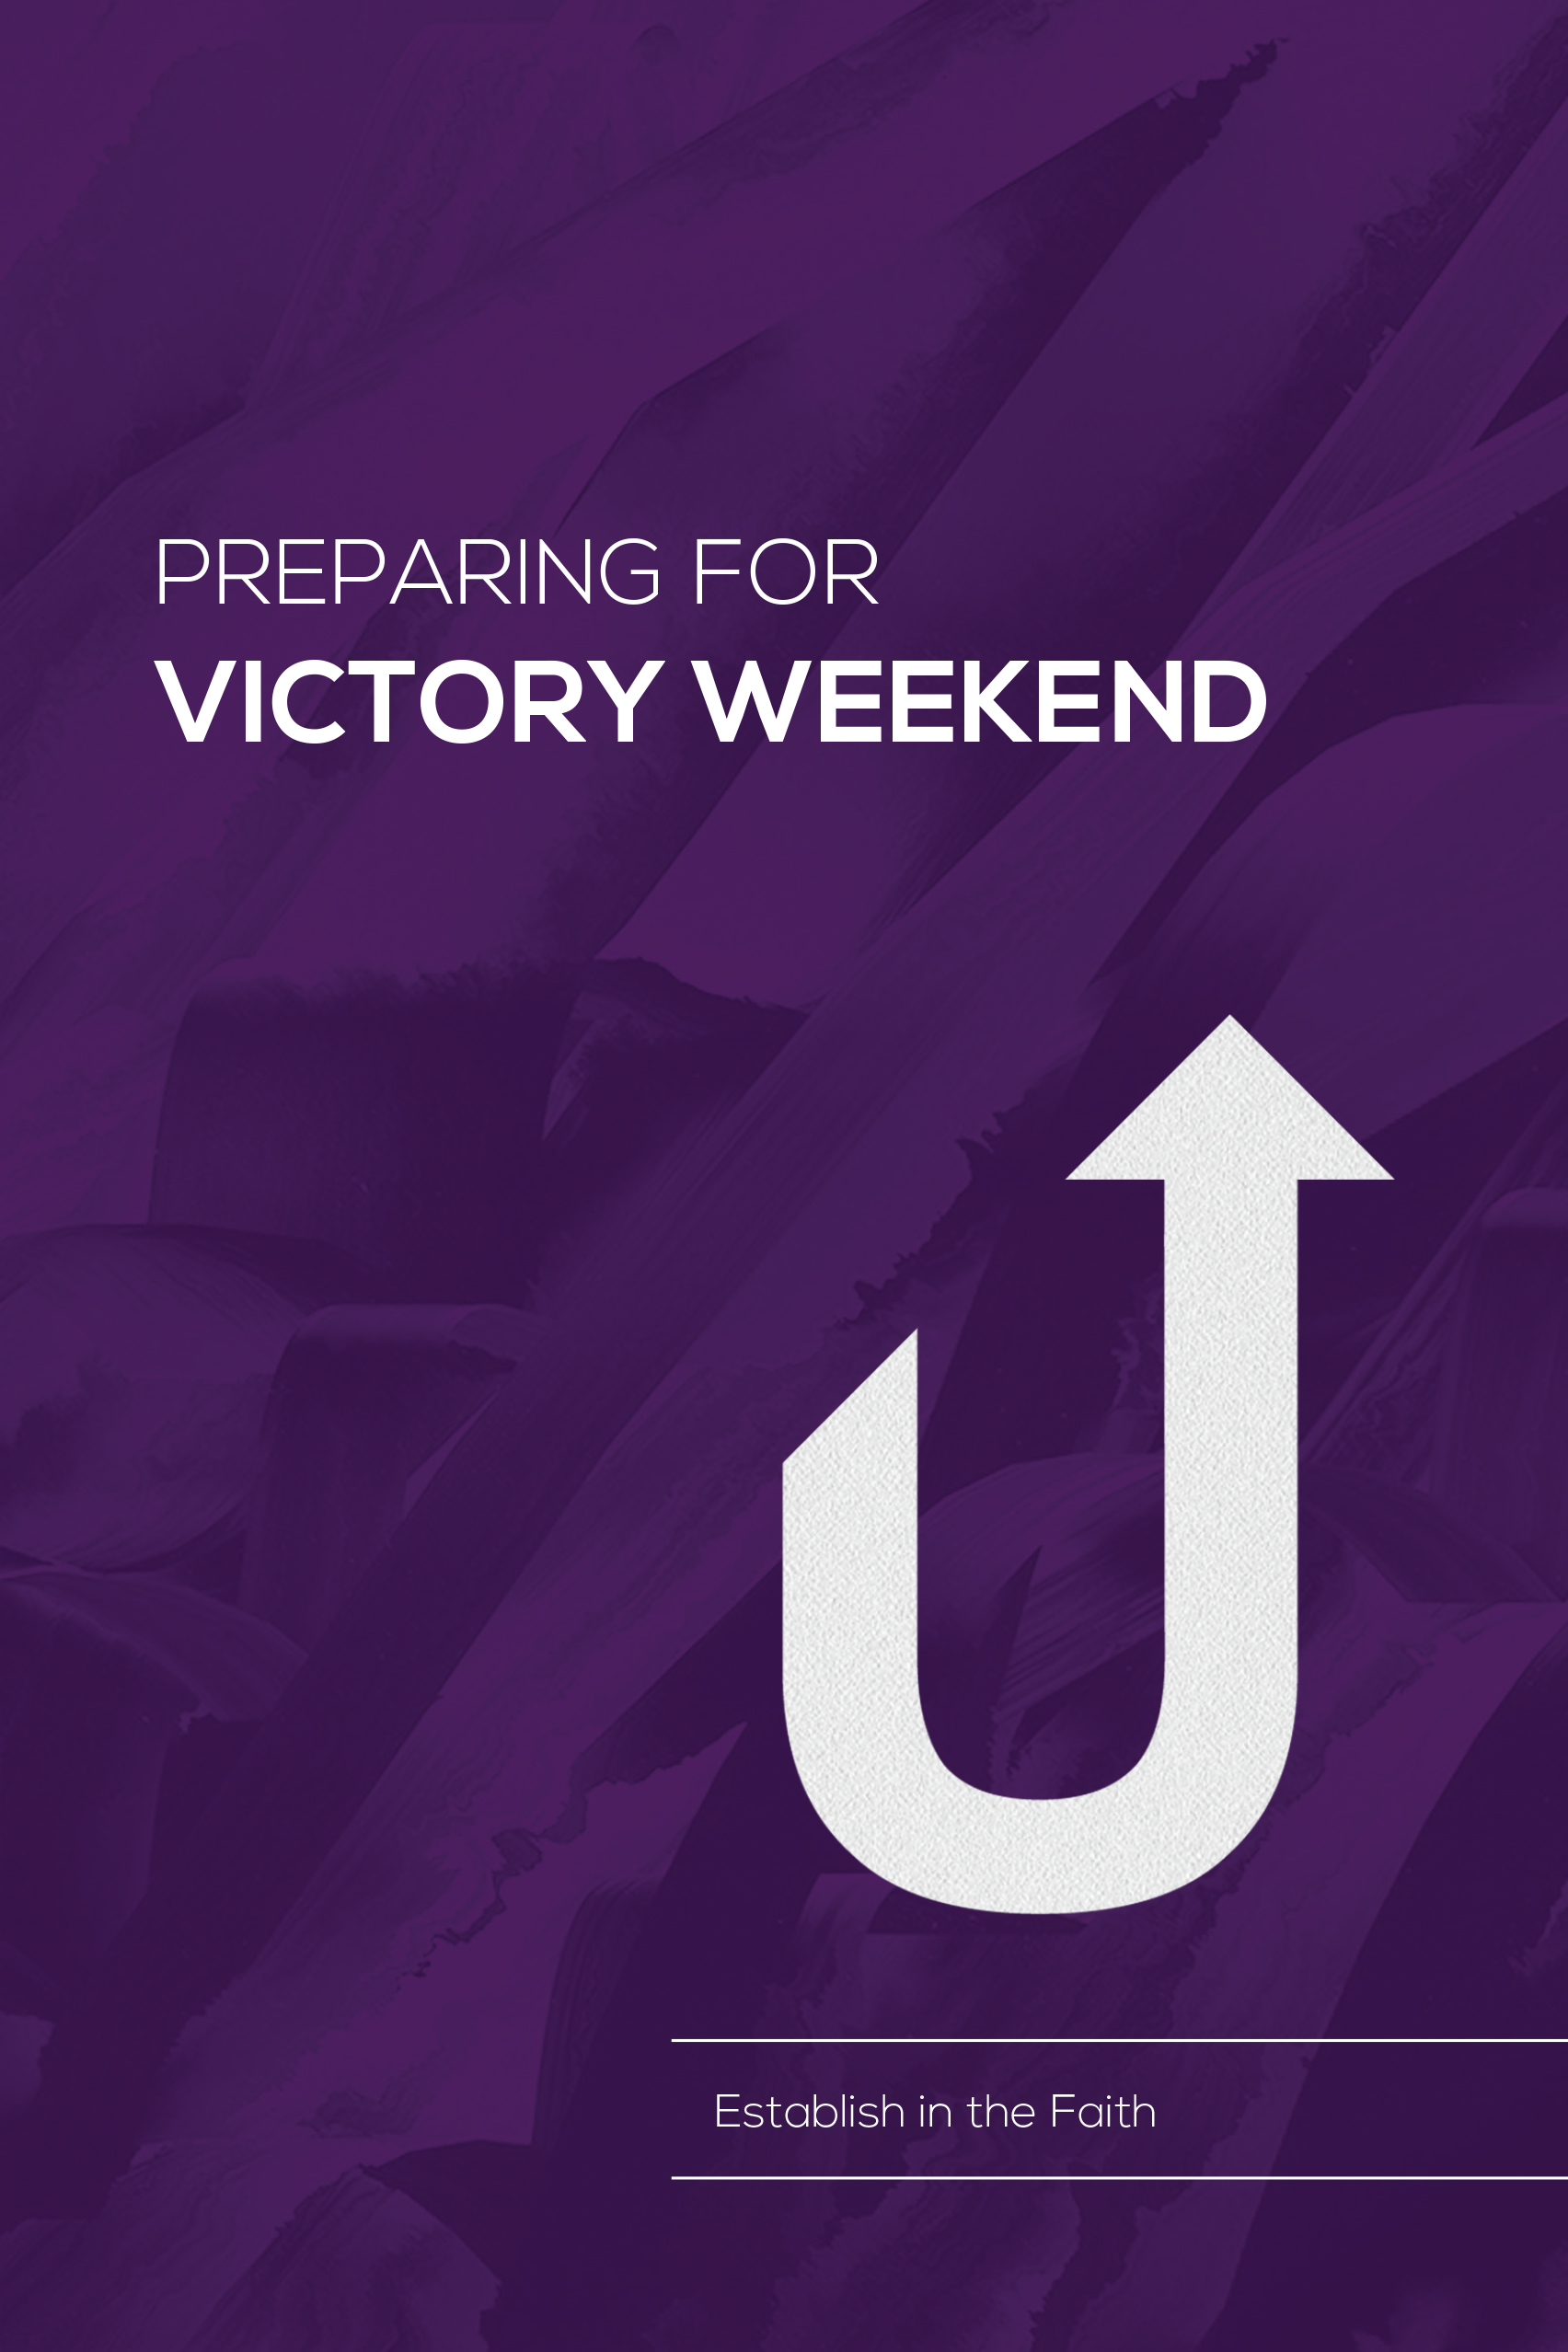 Preparing for Victory Weekend: Establish in the Faith-image